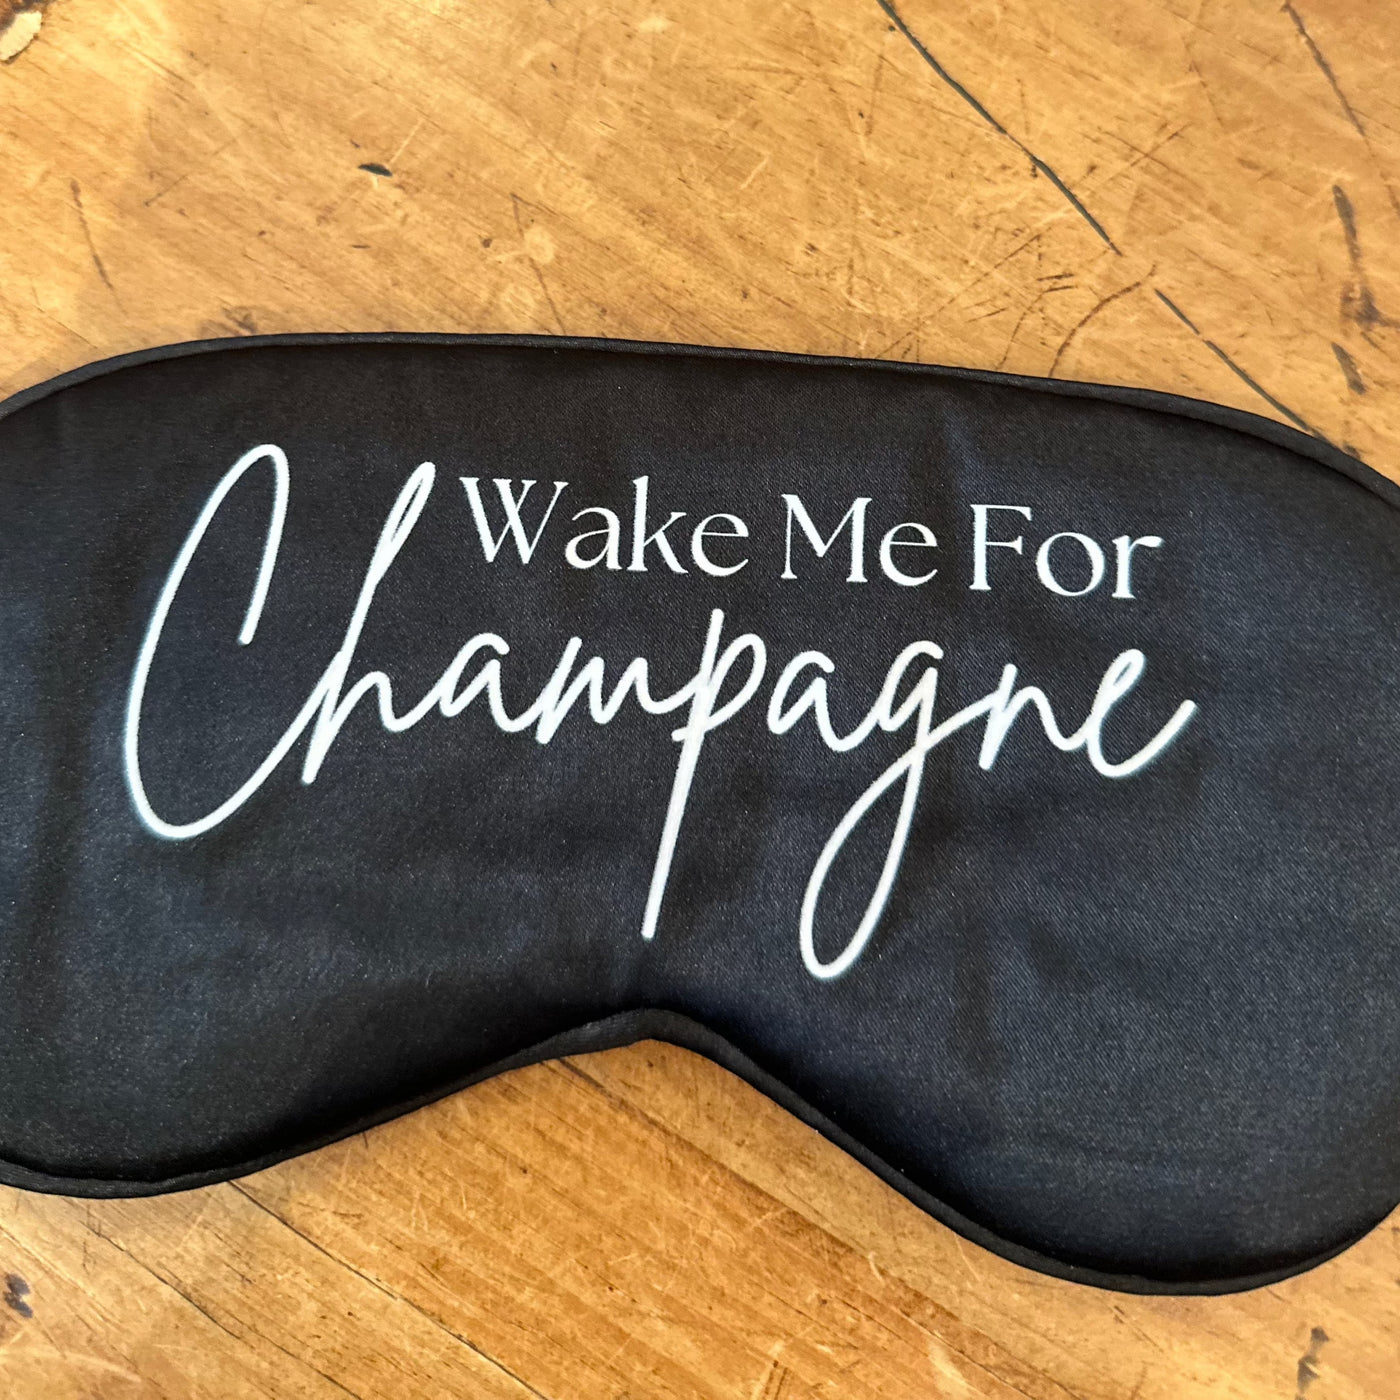 "Wake Me For Champagne" Satin Eye Mask-Accessories-Anna Bella Fine Lingerie-Black-Anna Bella Fine Lingerie, Reveal Your Most Gorgeous Self!